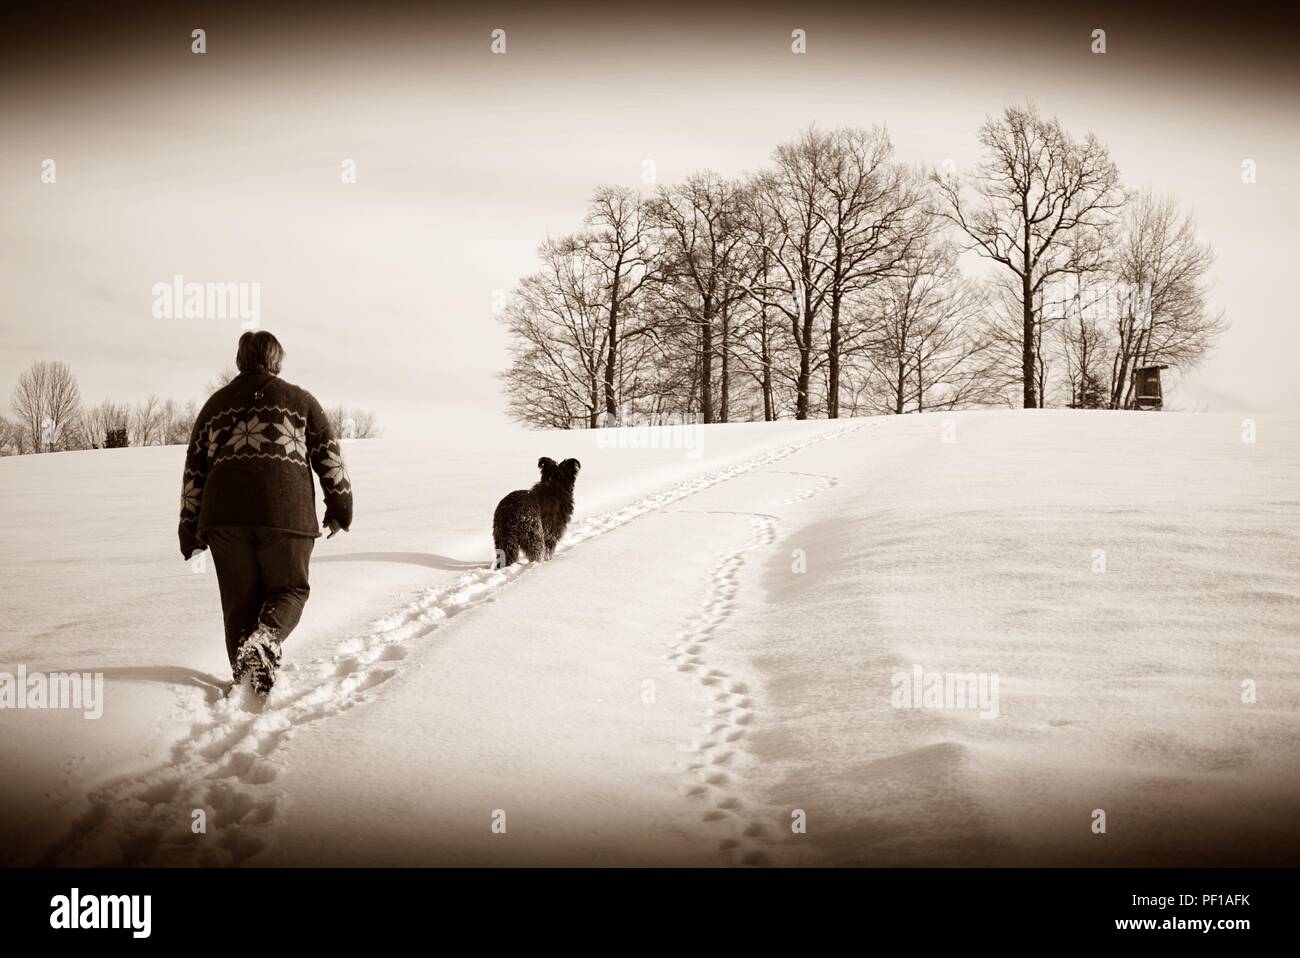 Snowscape, woman with dog walking a path that trails off in the distance. B/W sepia with vignetting. Stock Photo